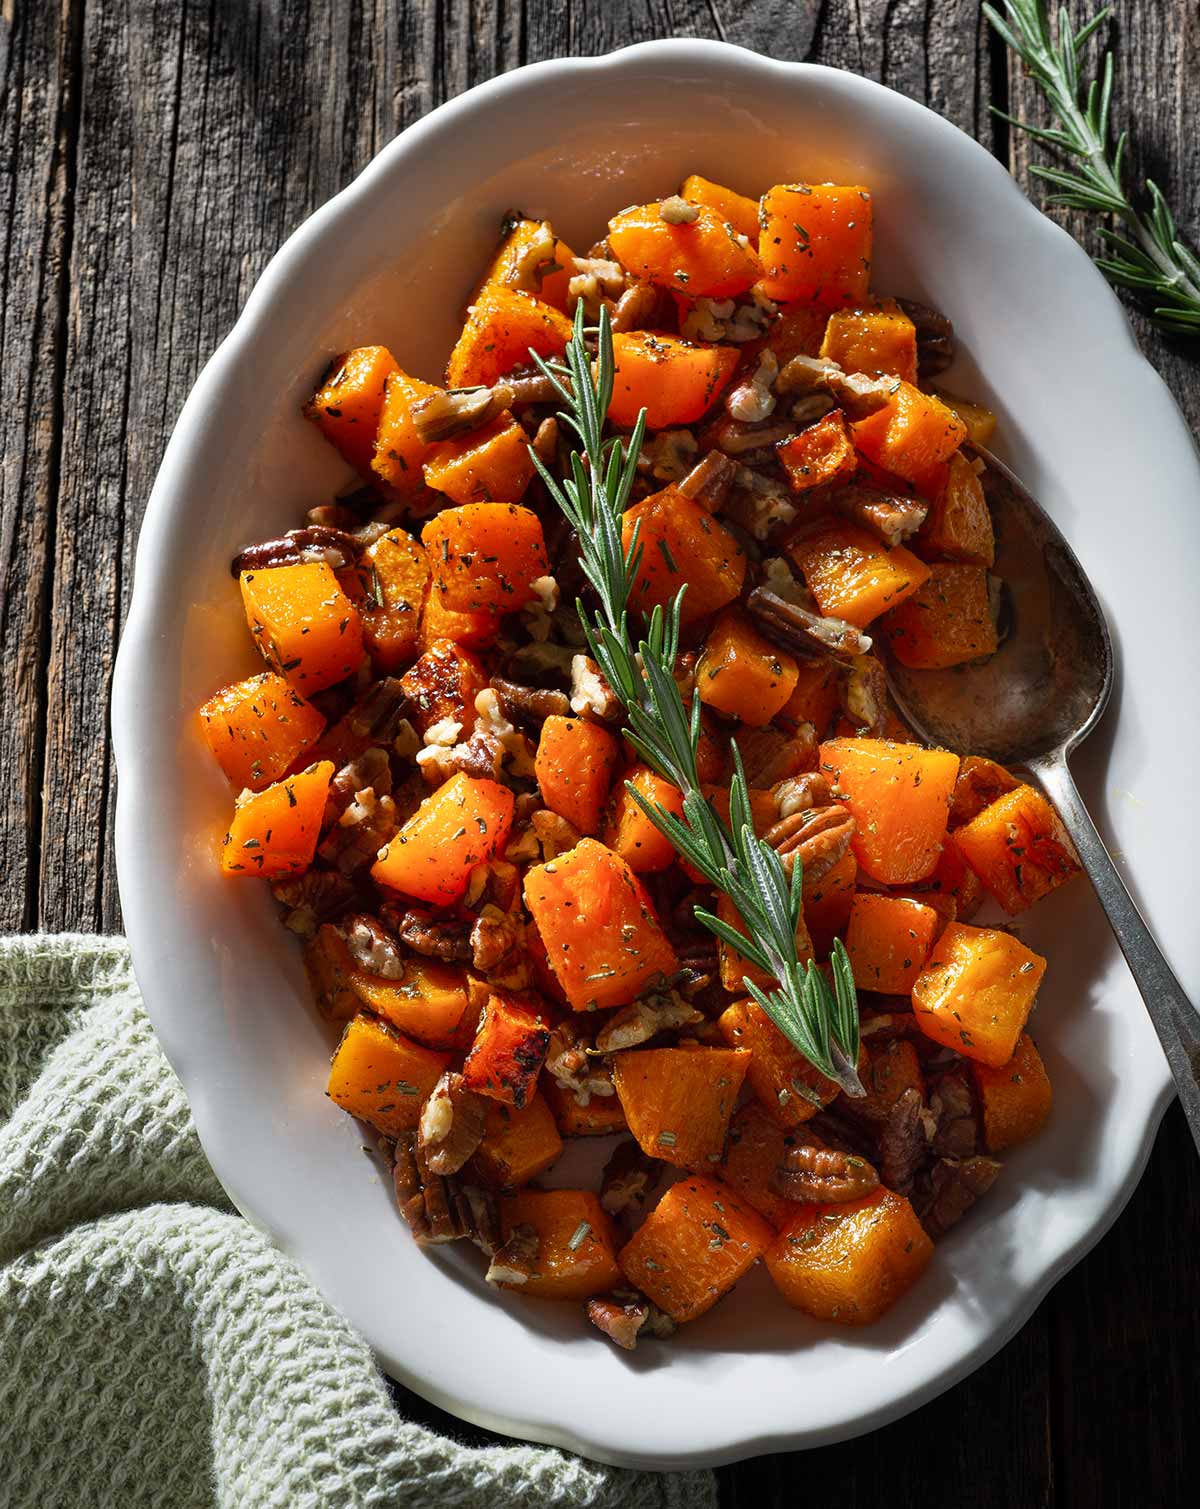 Roasted butternut squash with pecans and rosemary on a plate.